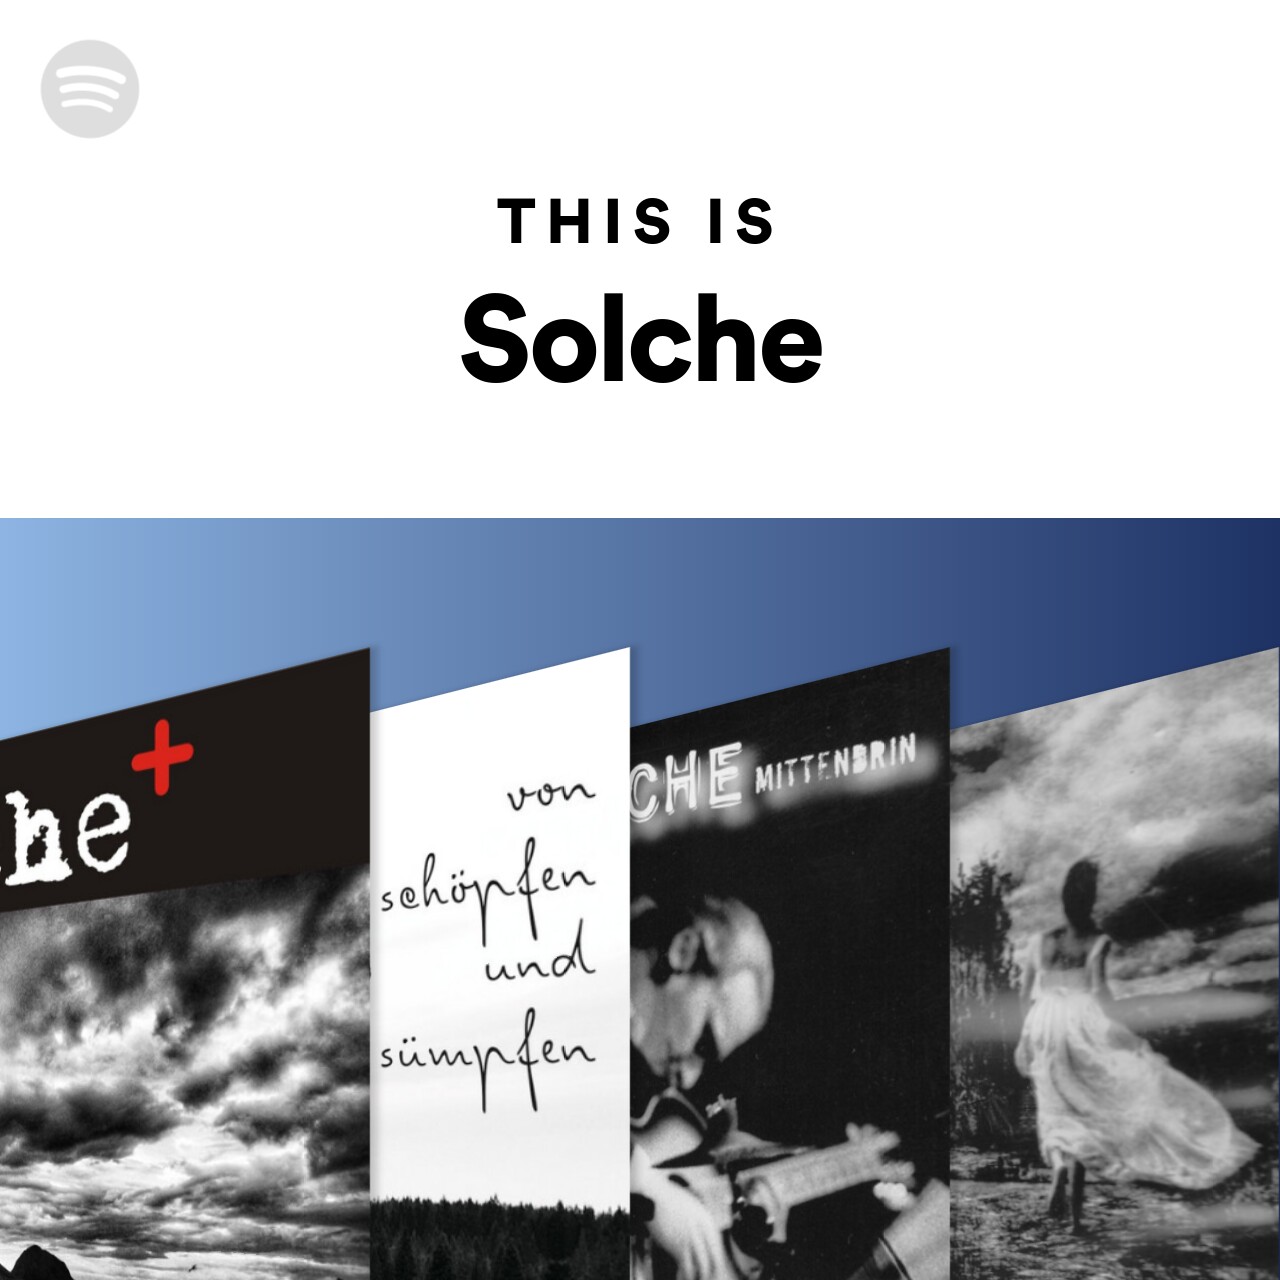 This Is Solche